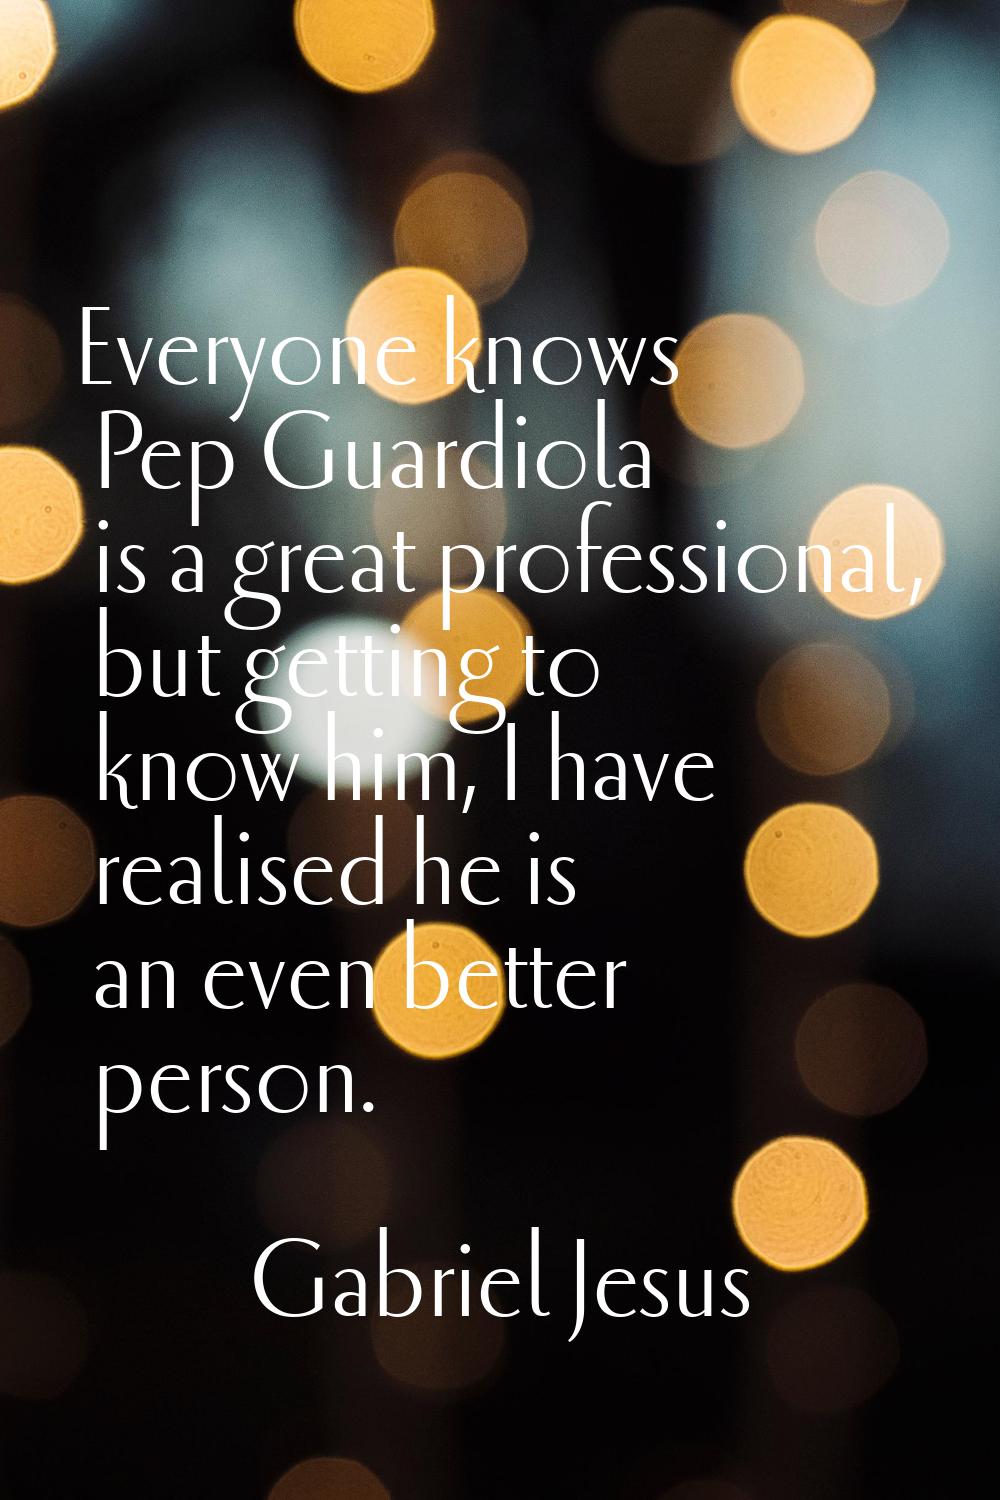 Everyone knows Pep Guardiola is a great professional, but getting to know him, I have realised he i